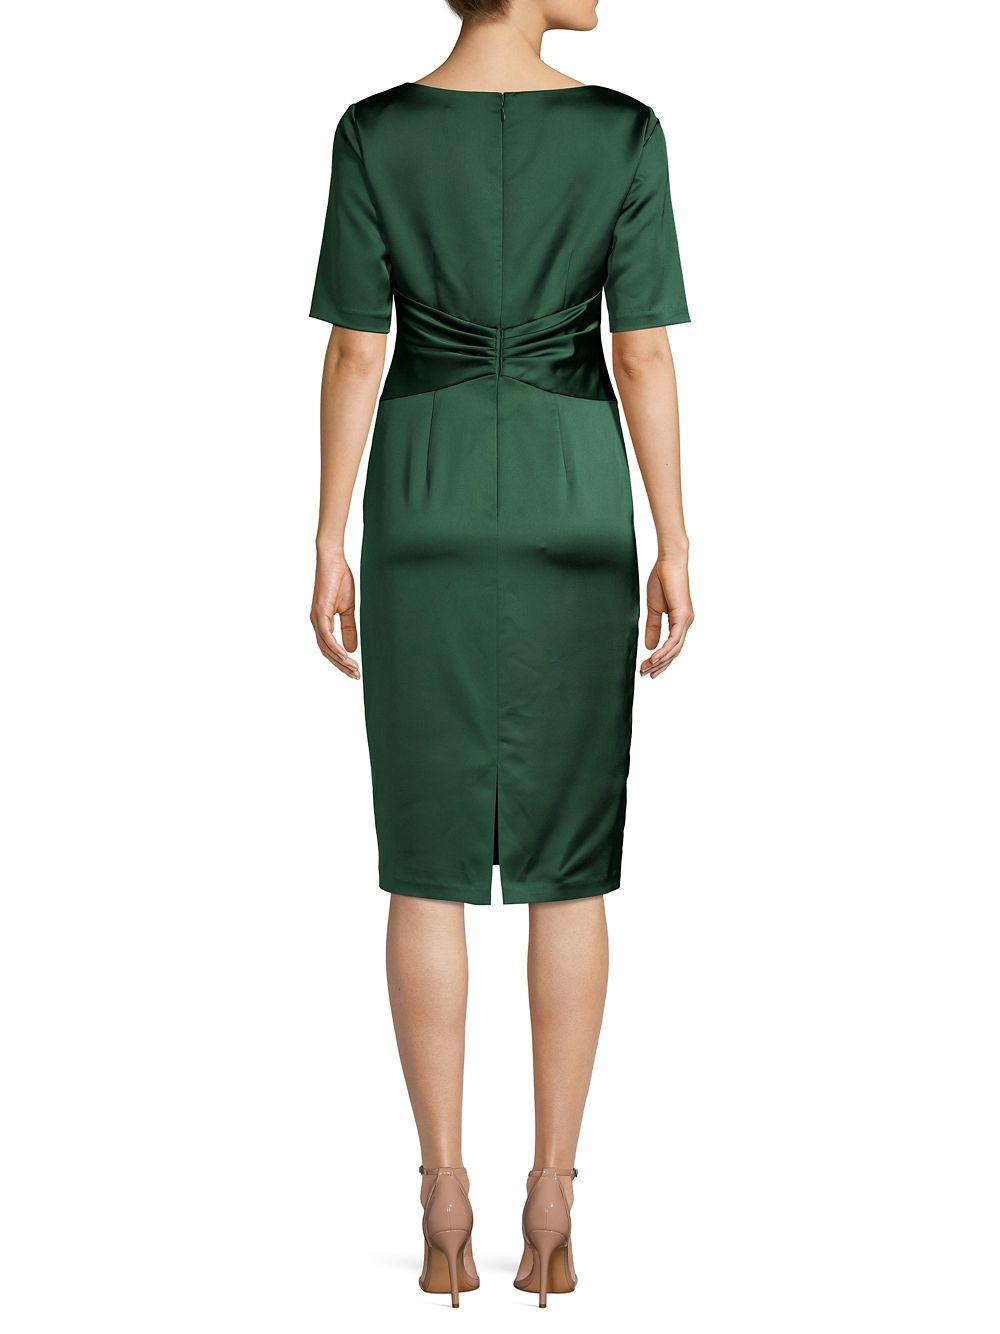 Adrianna Papell Pleat Wrap Satin Cocktail Dress in Green | Lyst